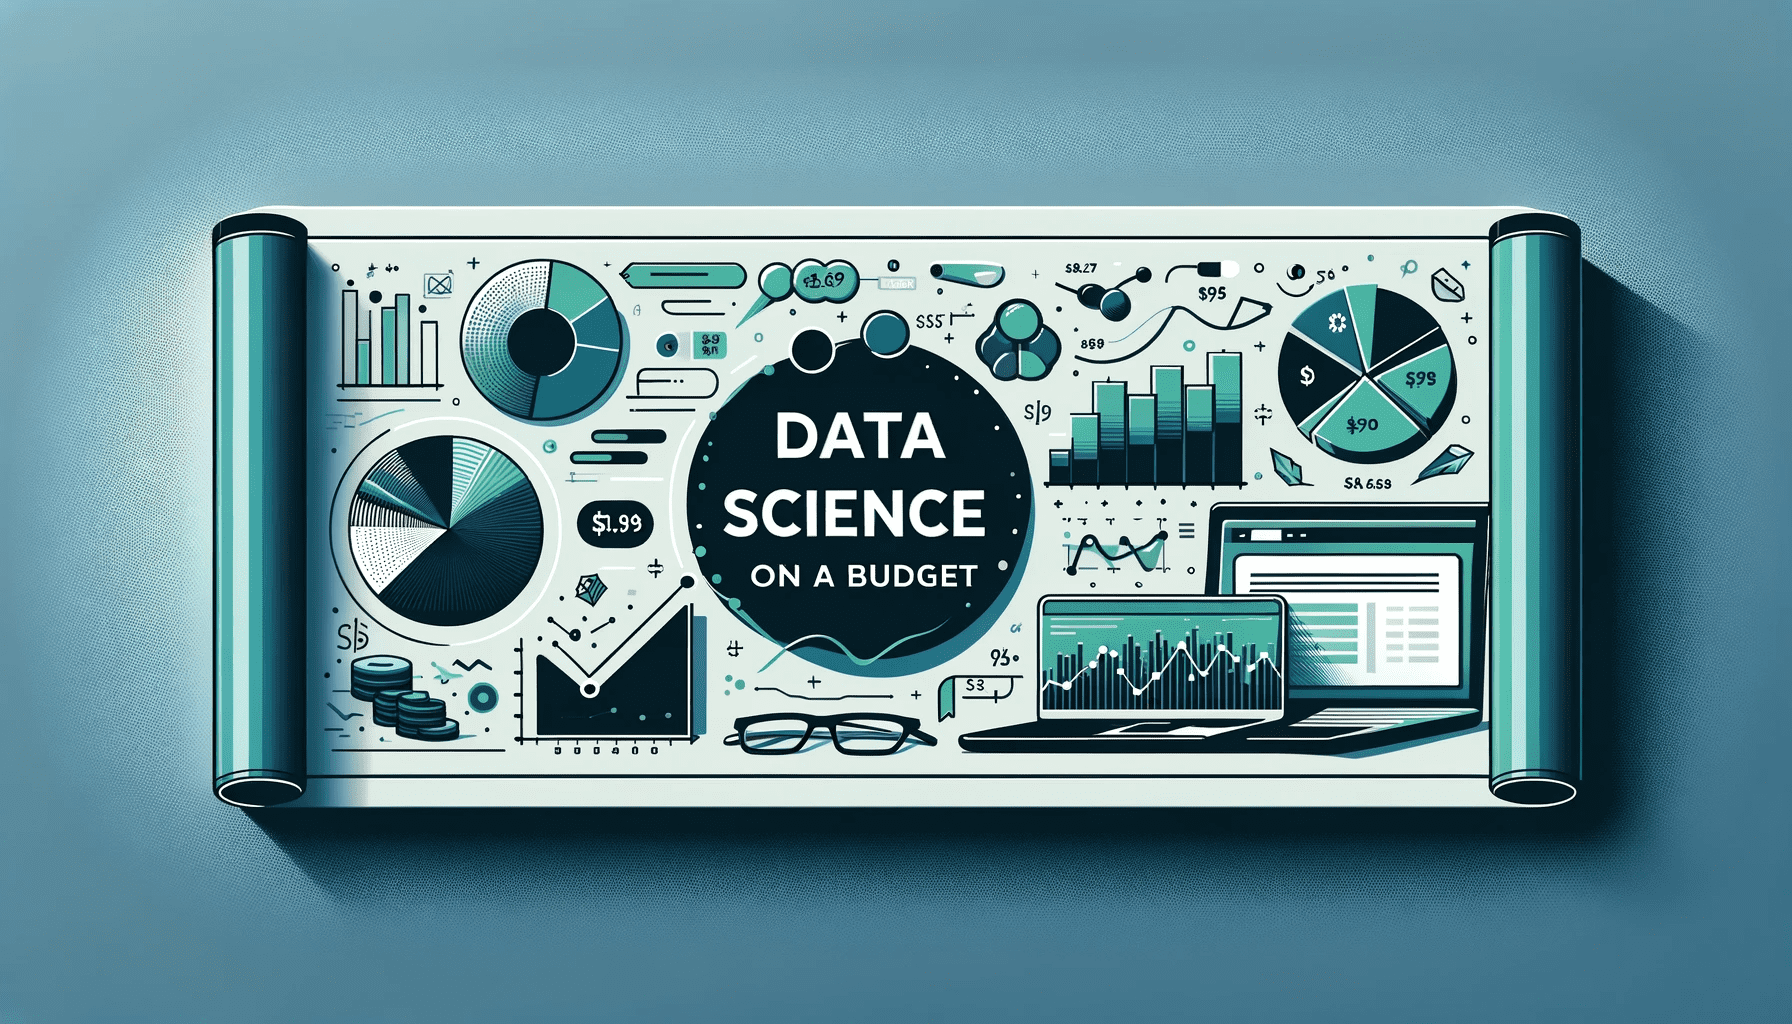 Learn Data Science on a Budget